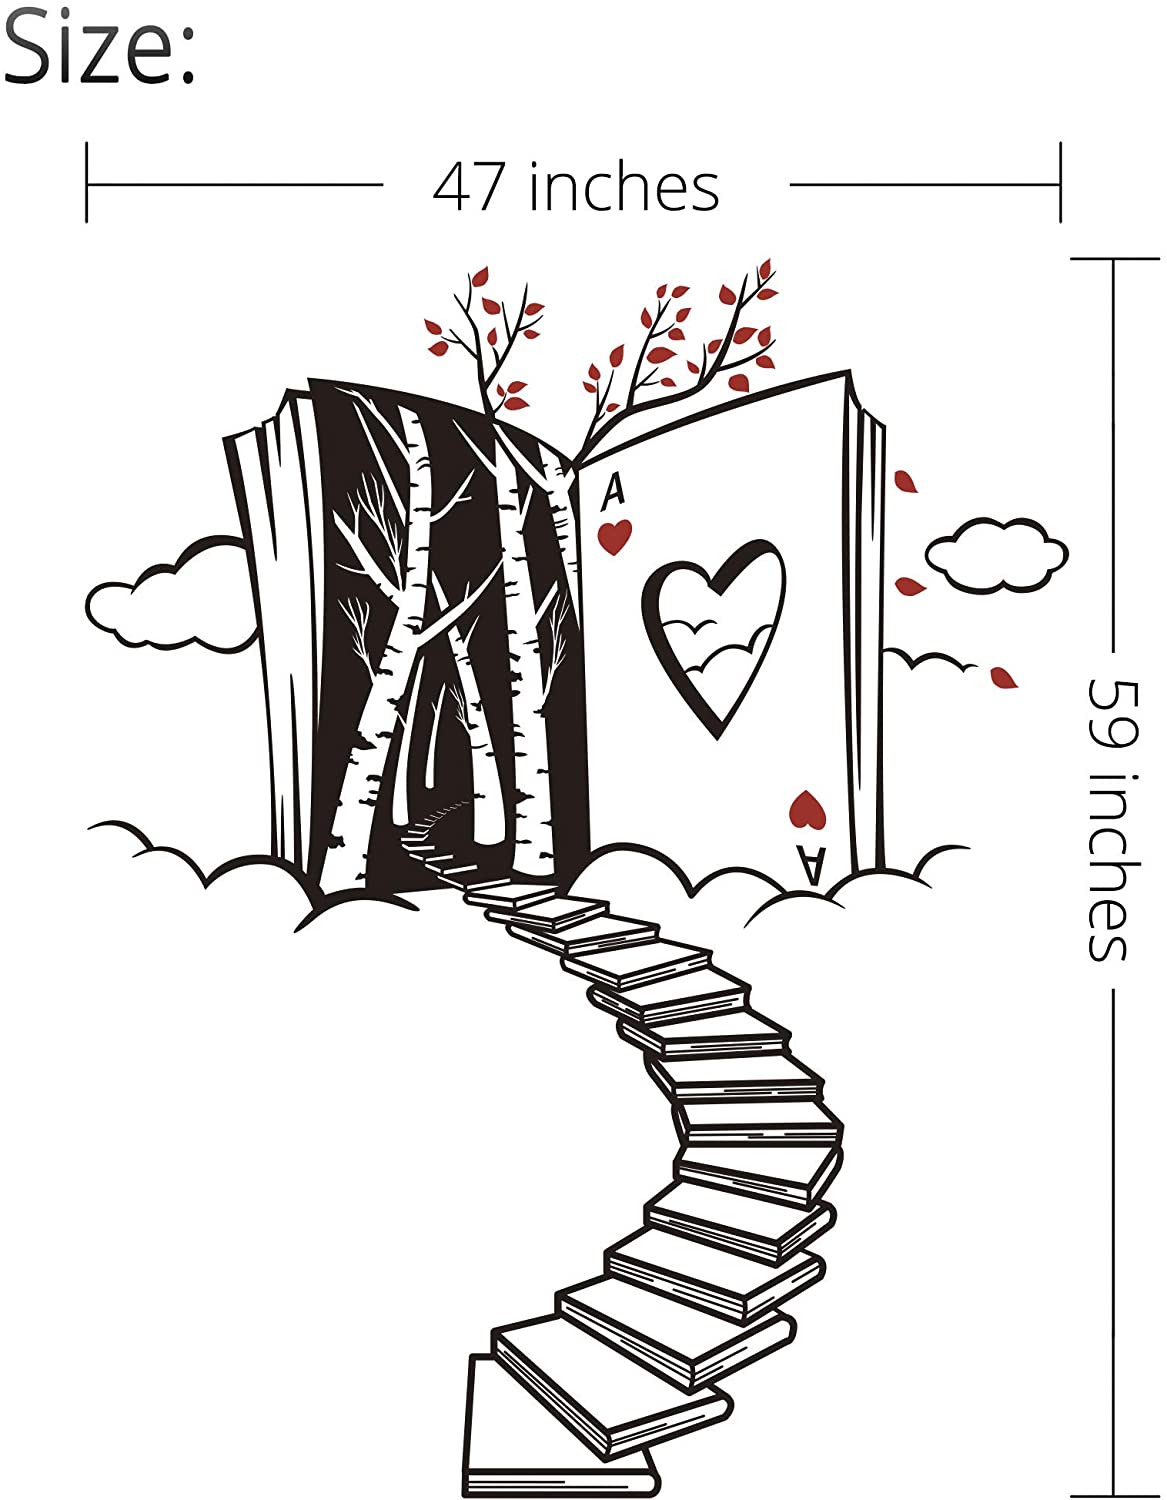 The Giftery Hubs Wall Decor for Bedroom with Stairs of Books, Trees and Ace of Hearts